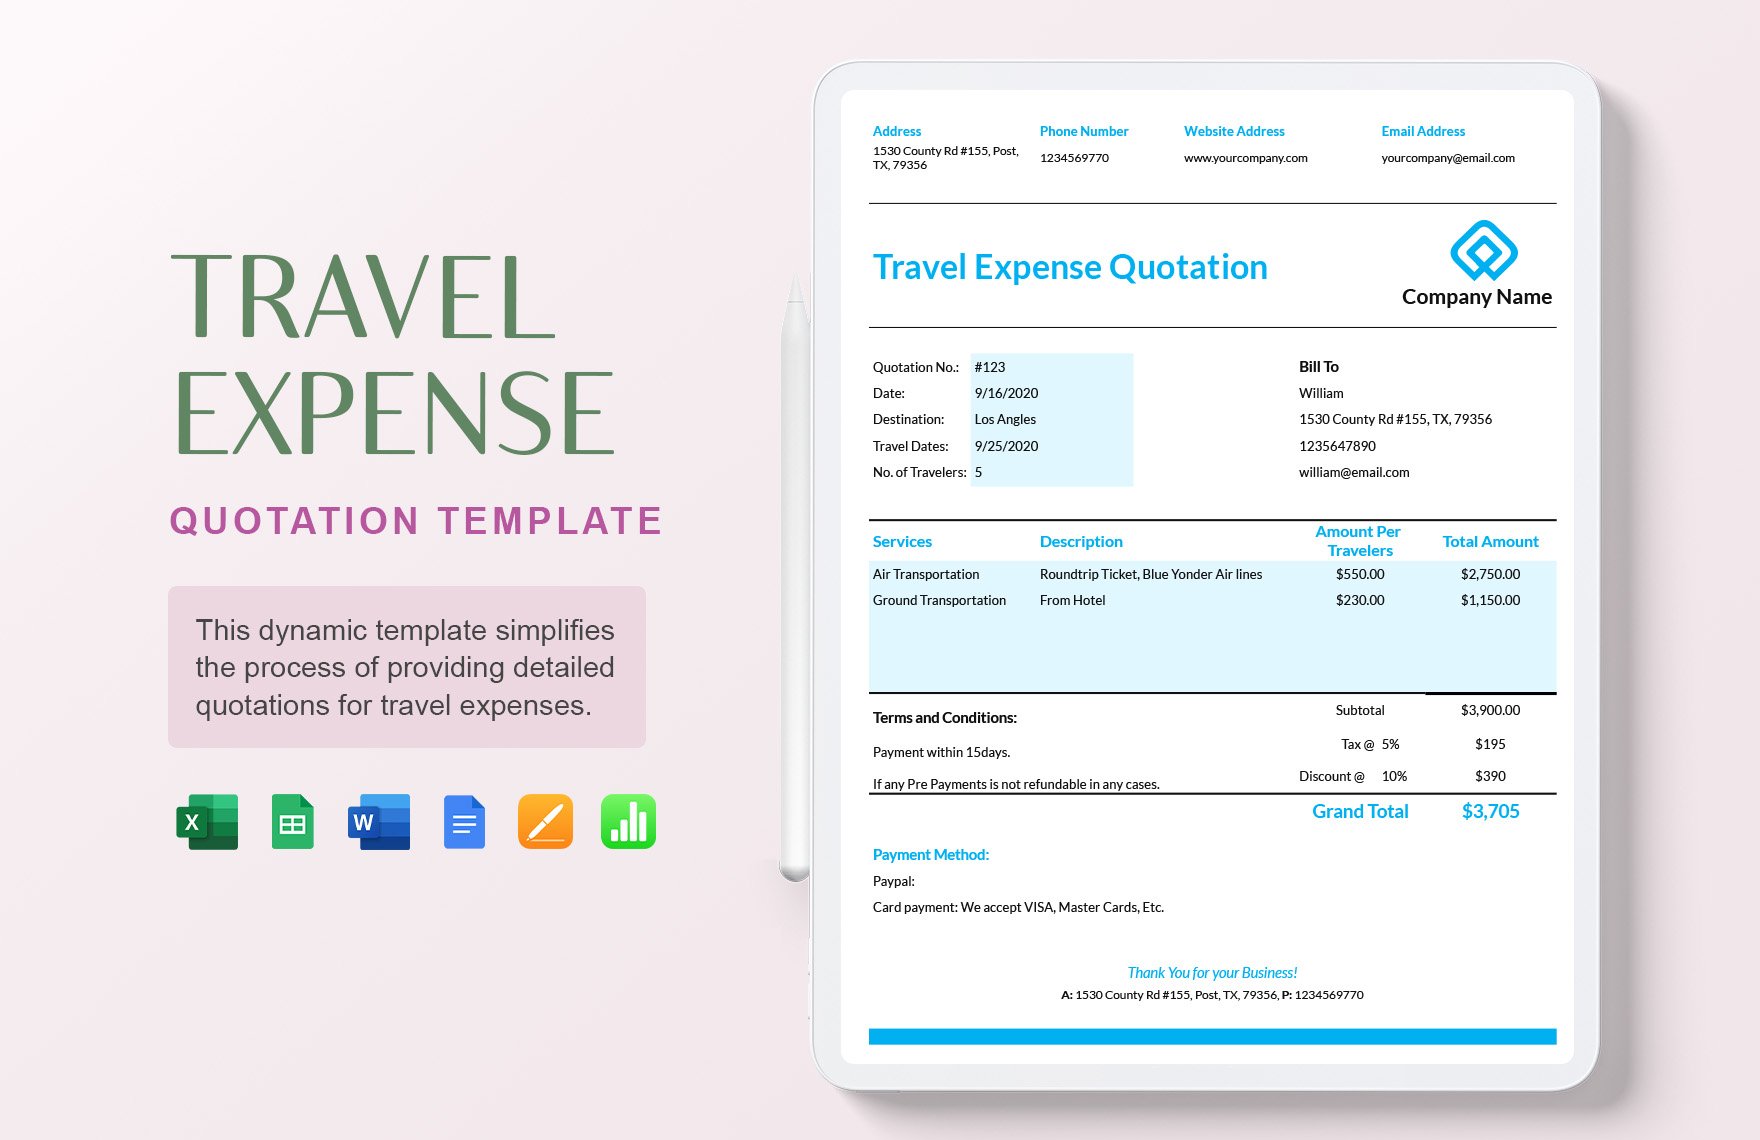 Travel Expense Quotation Template